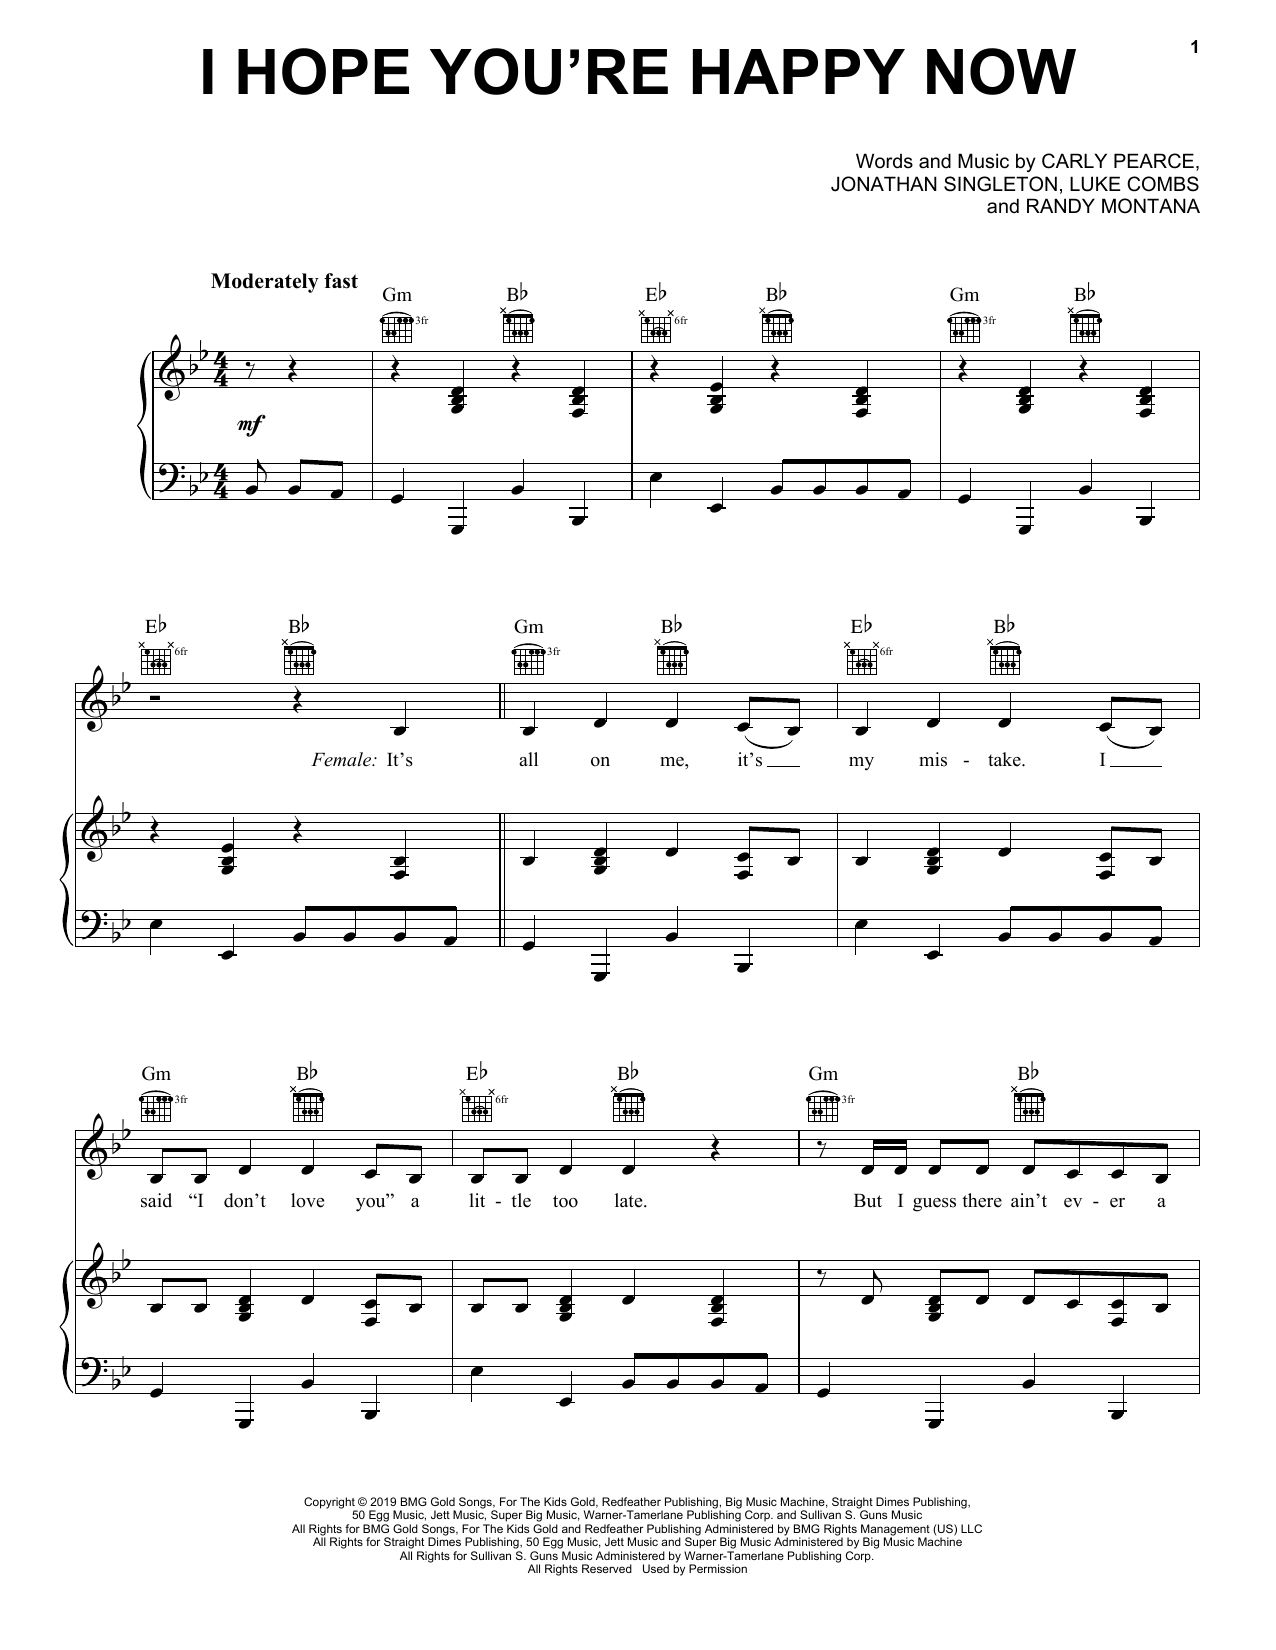 Download Carly Pearce & Lee Brice I Hope You're Happy Now Sheet Music